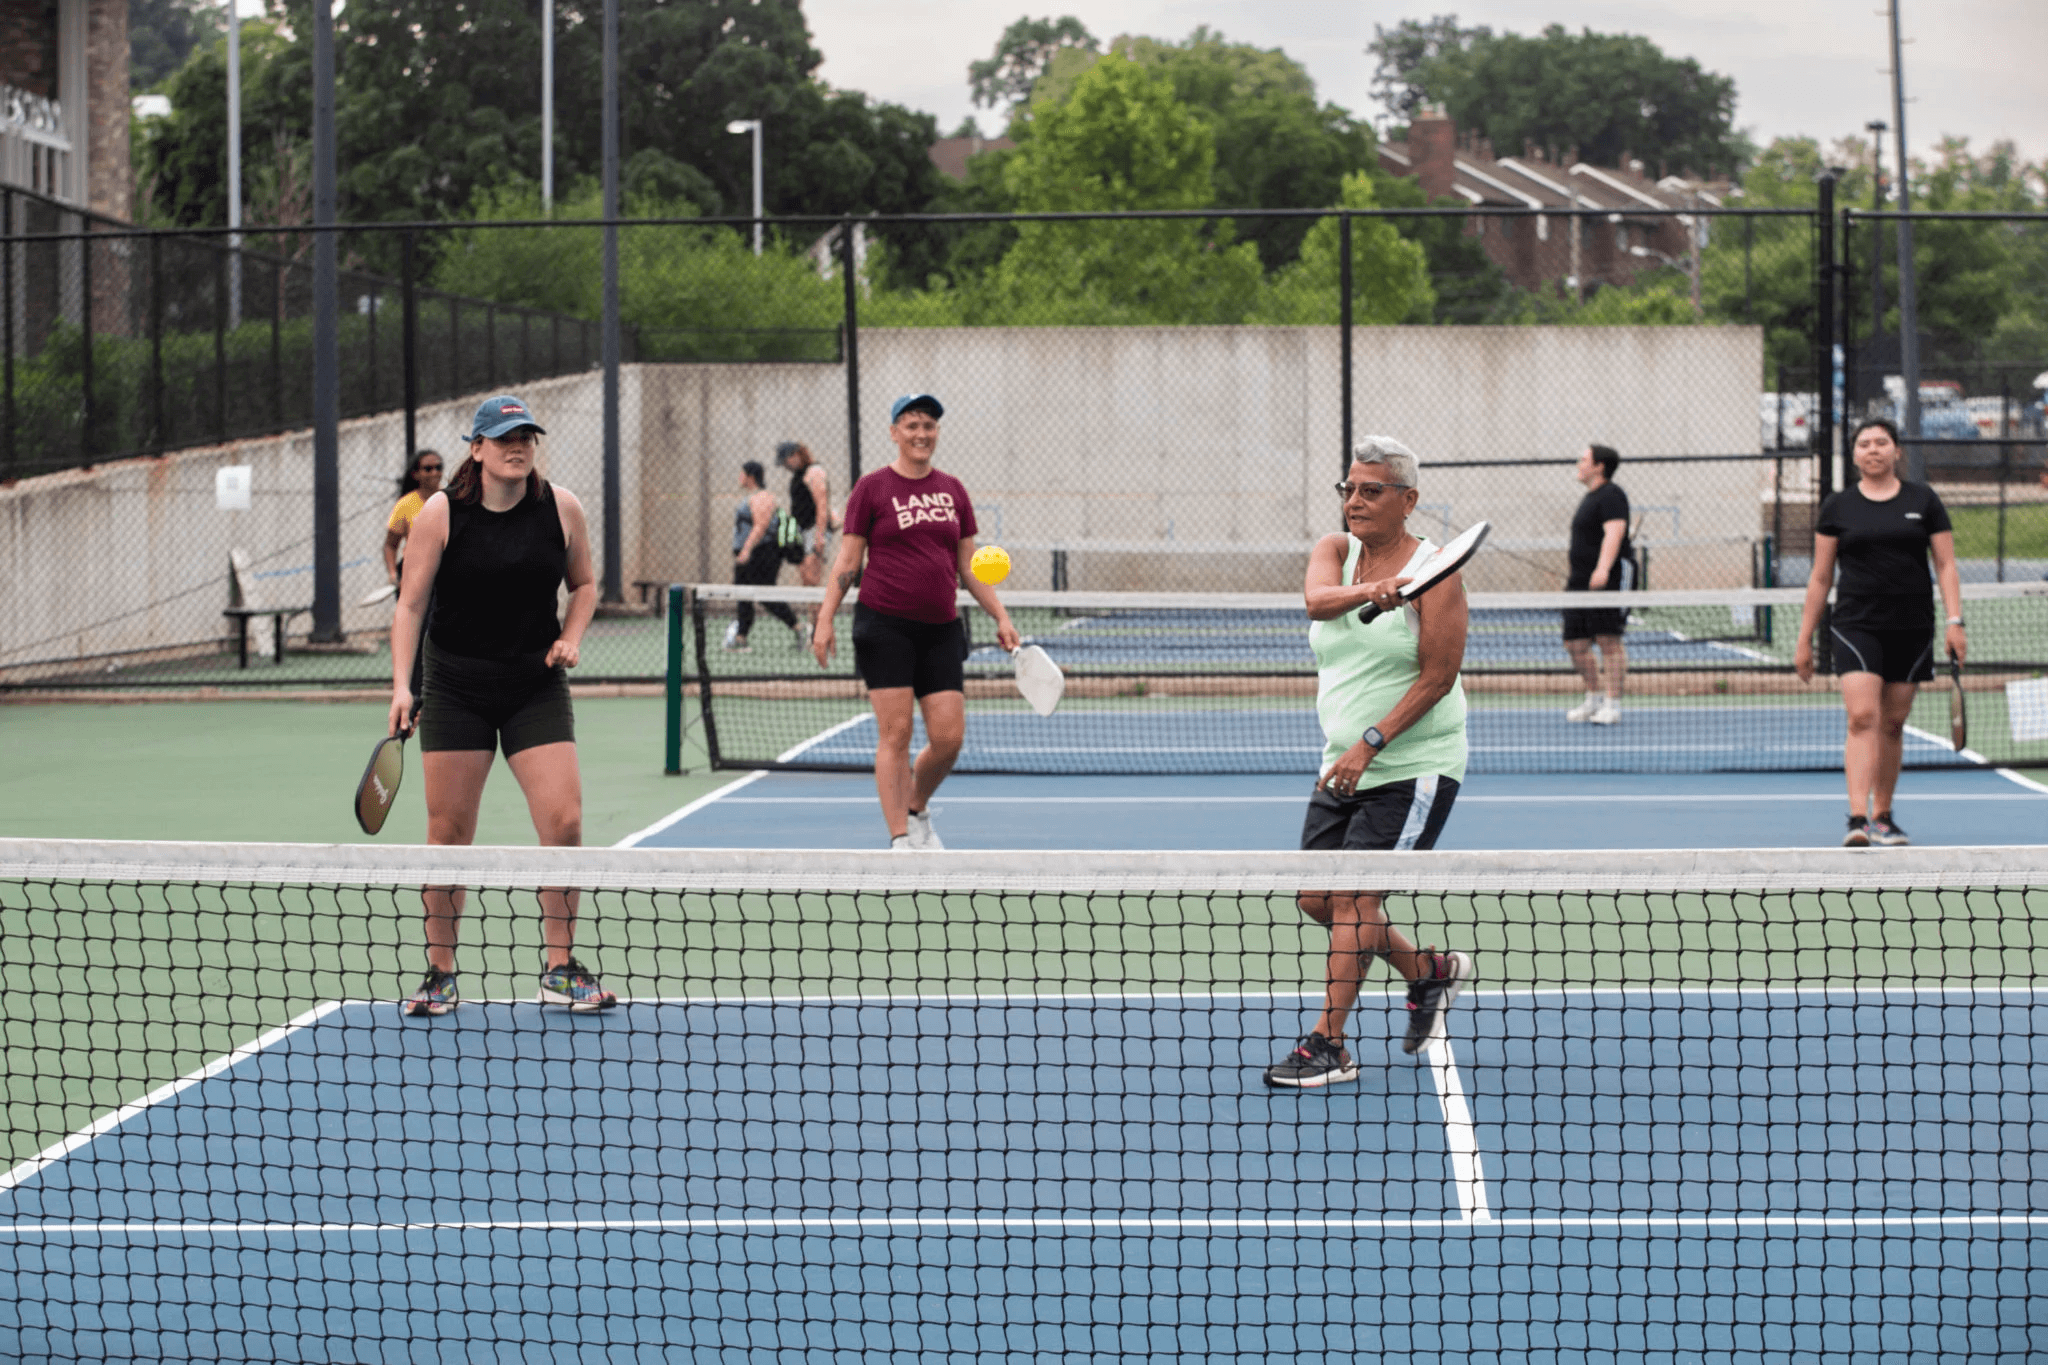 Get Your Game On: How Pickleball Is Revolutionizing The World Of Sports